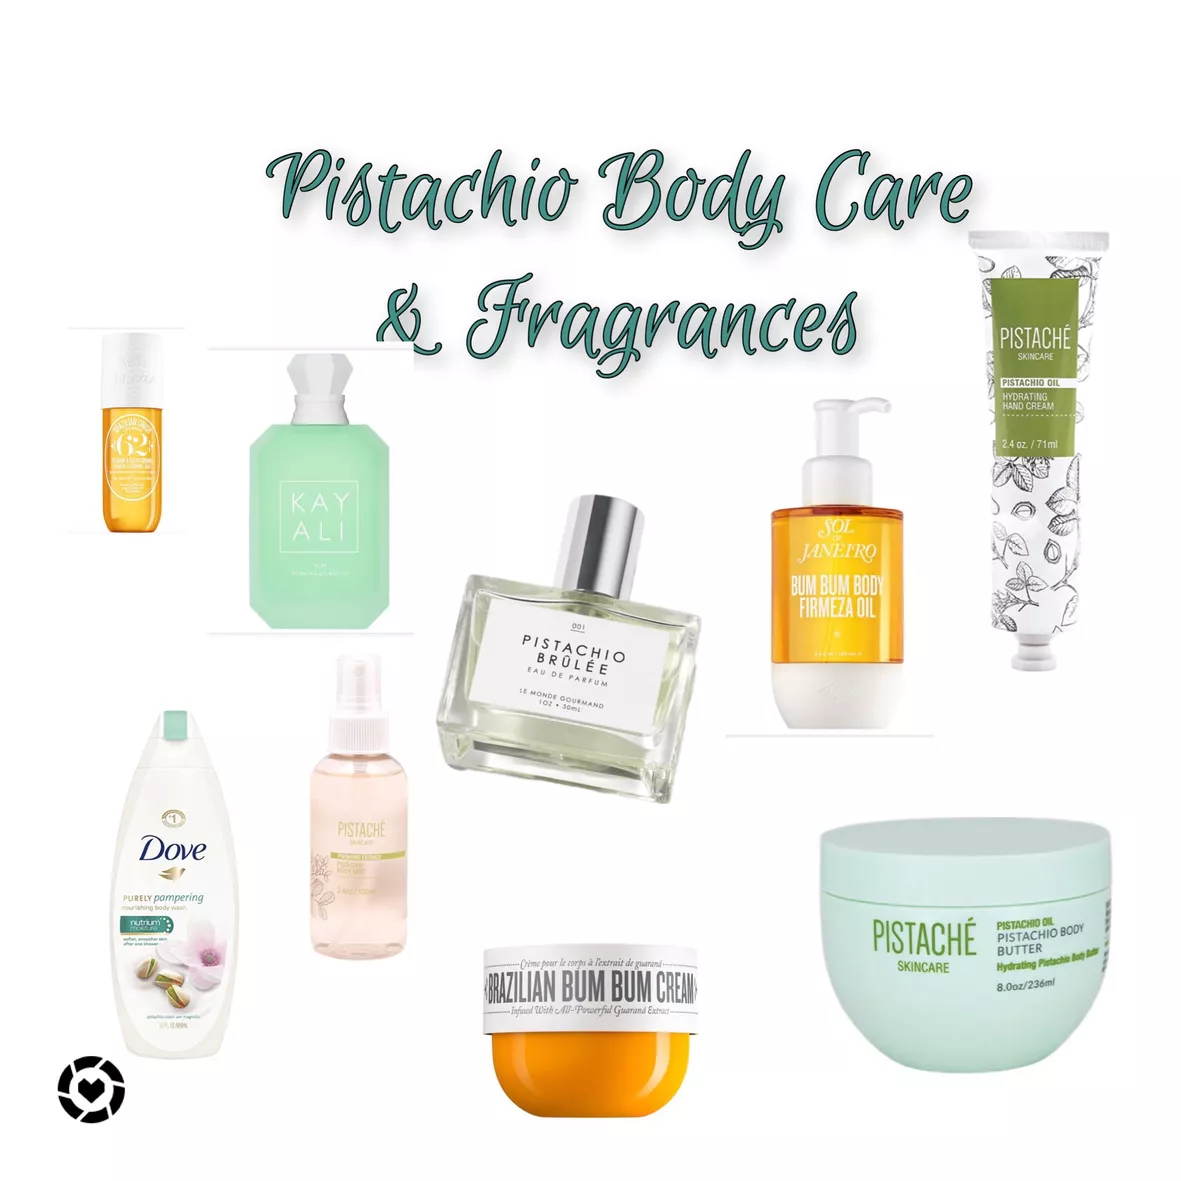 Skin Care, Body Care and Fragrances